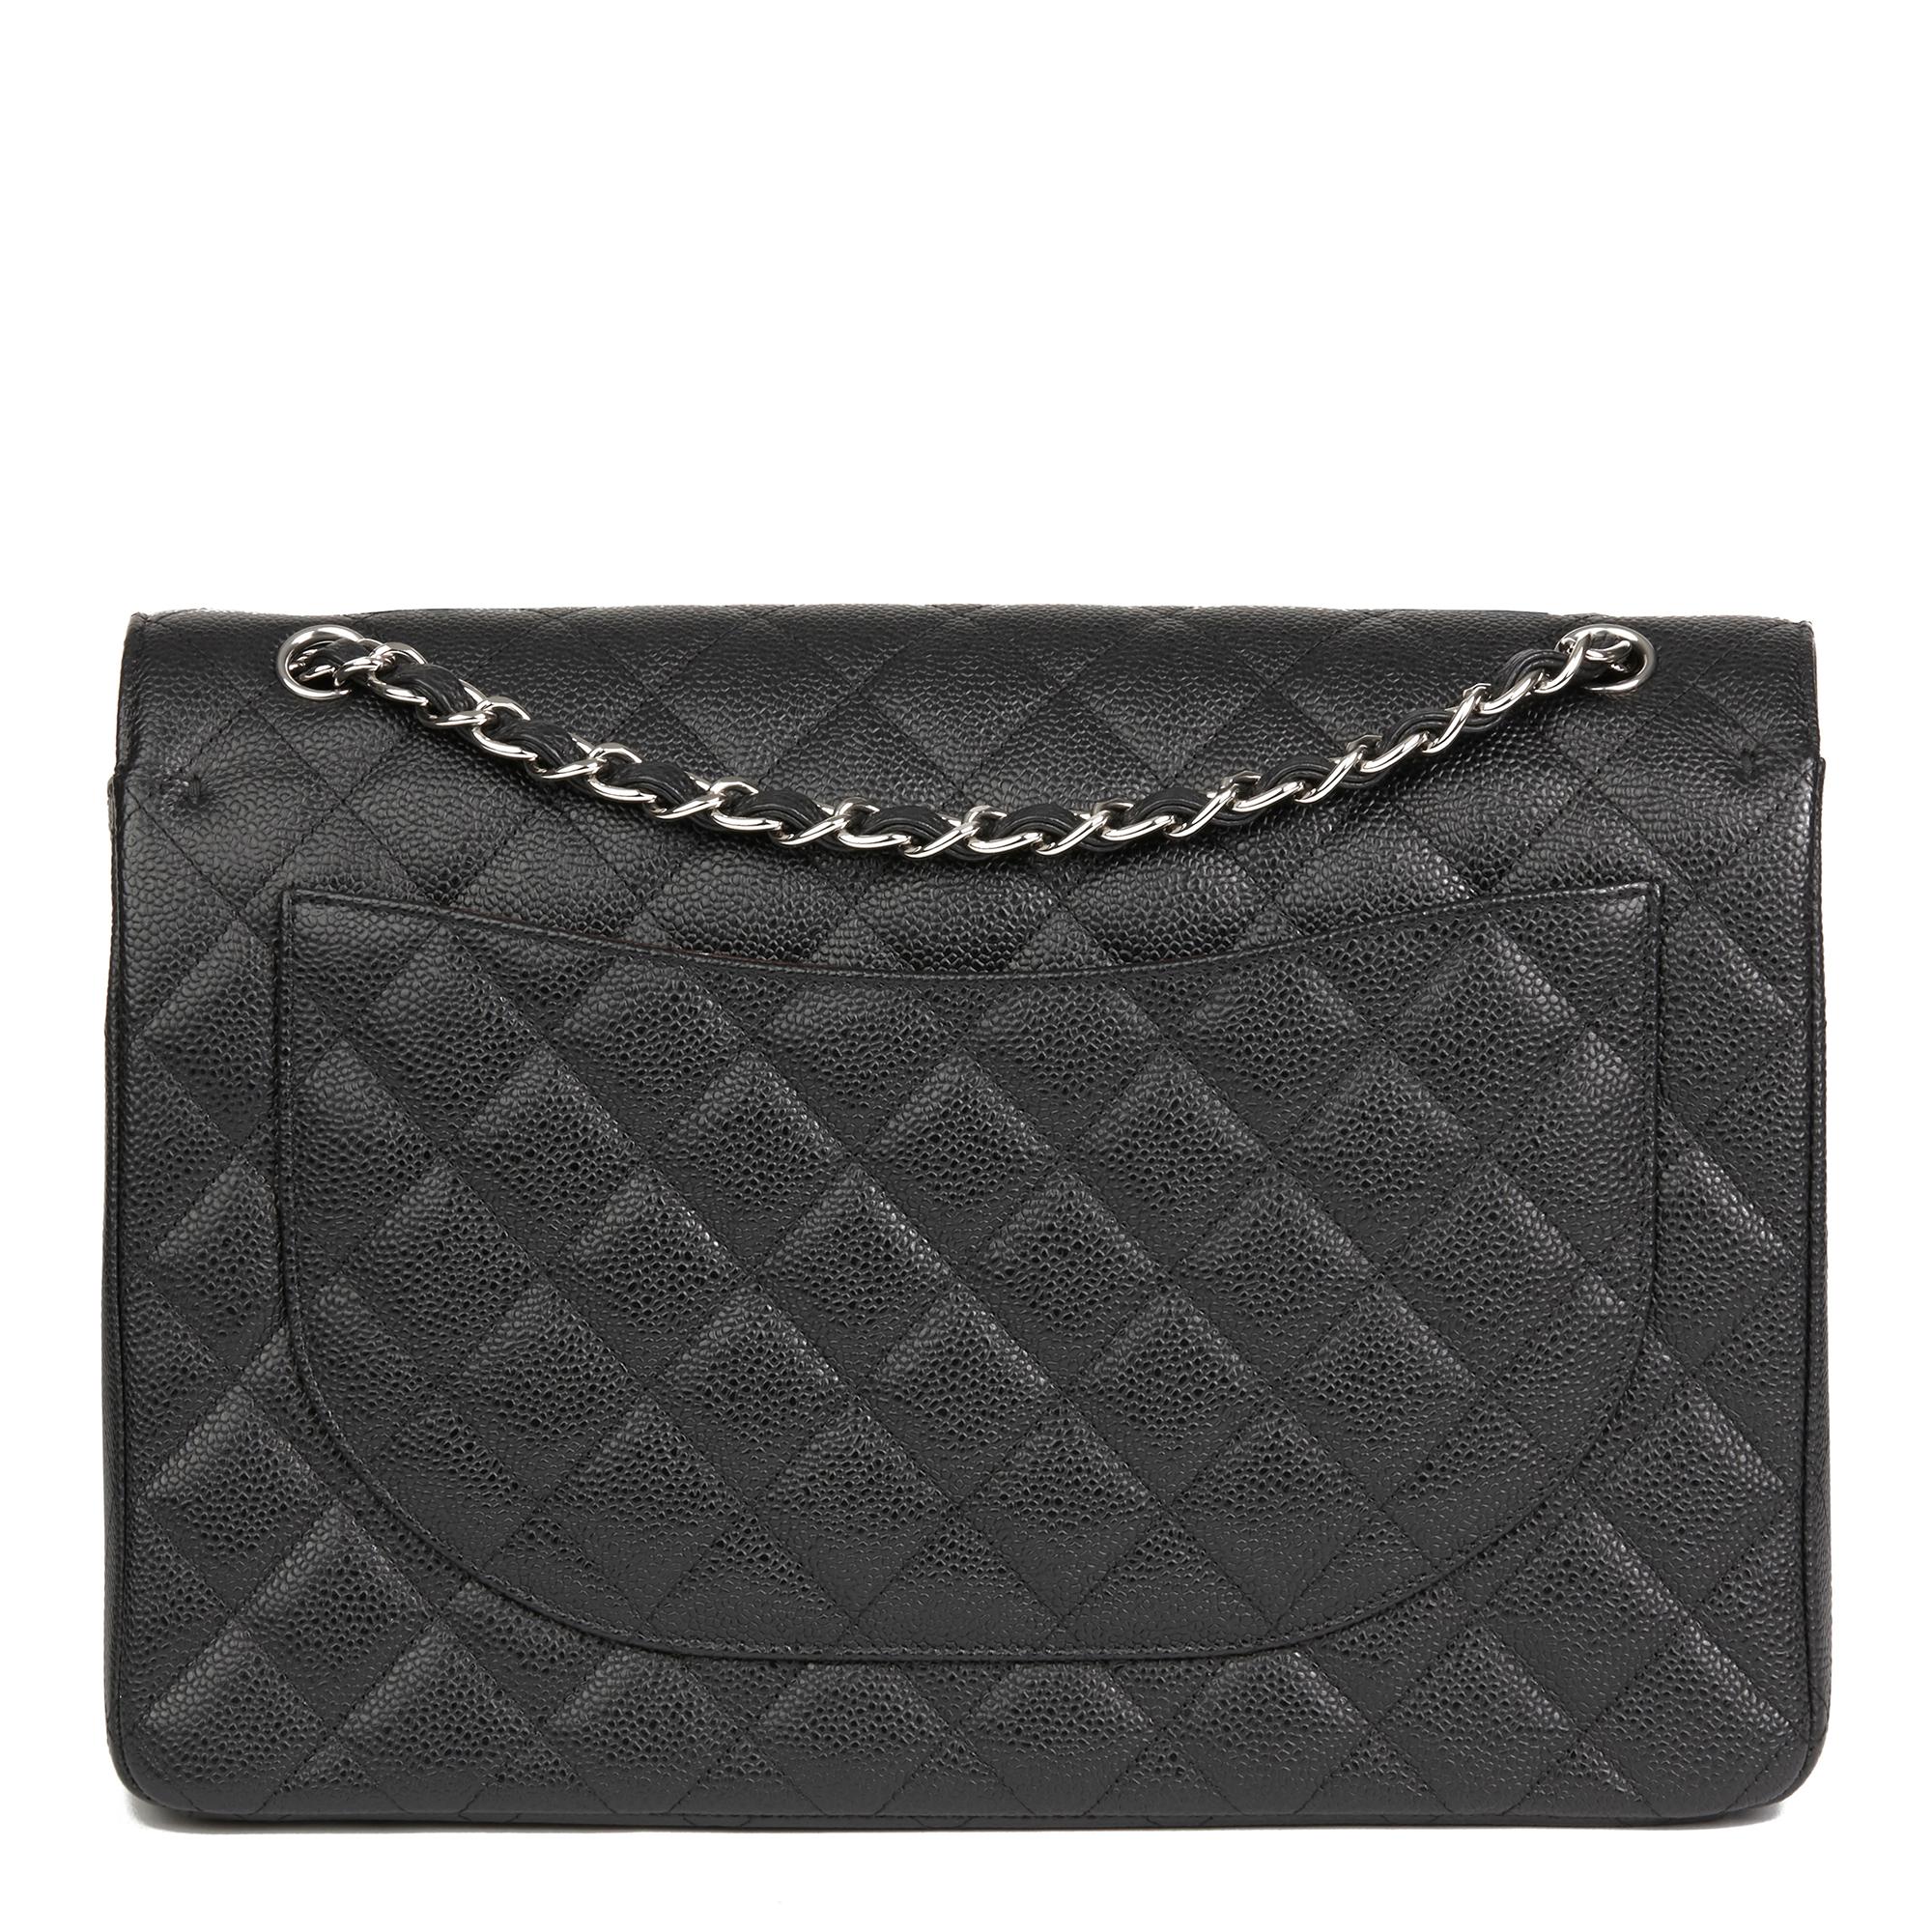 Women's 2012 Chanel Black Quilted Caviar Leather Maxi Classic Double Flap Bag